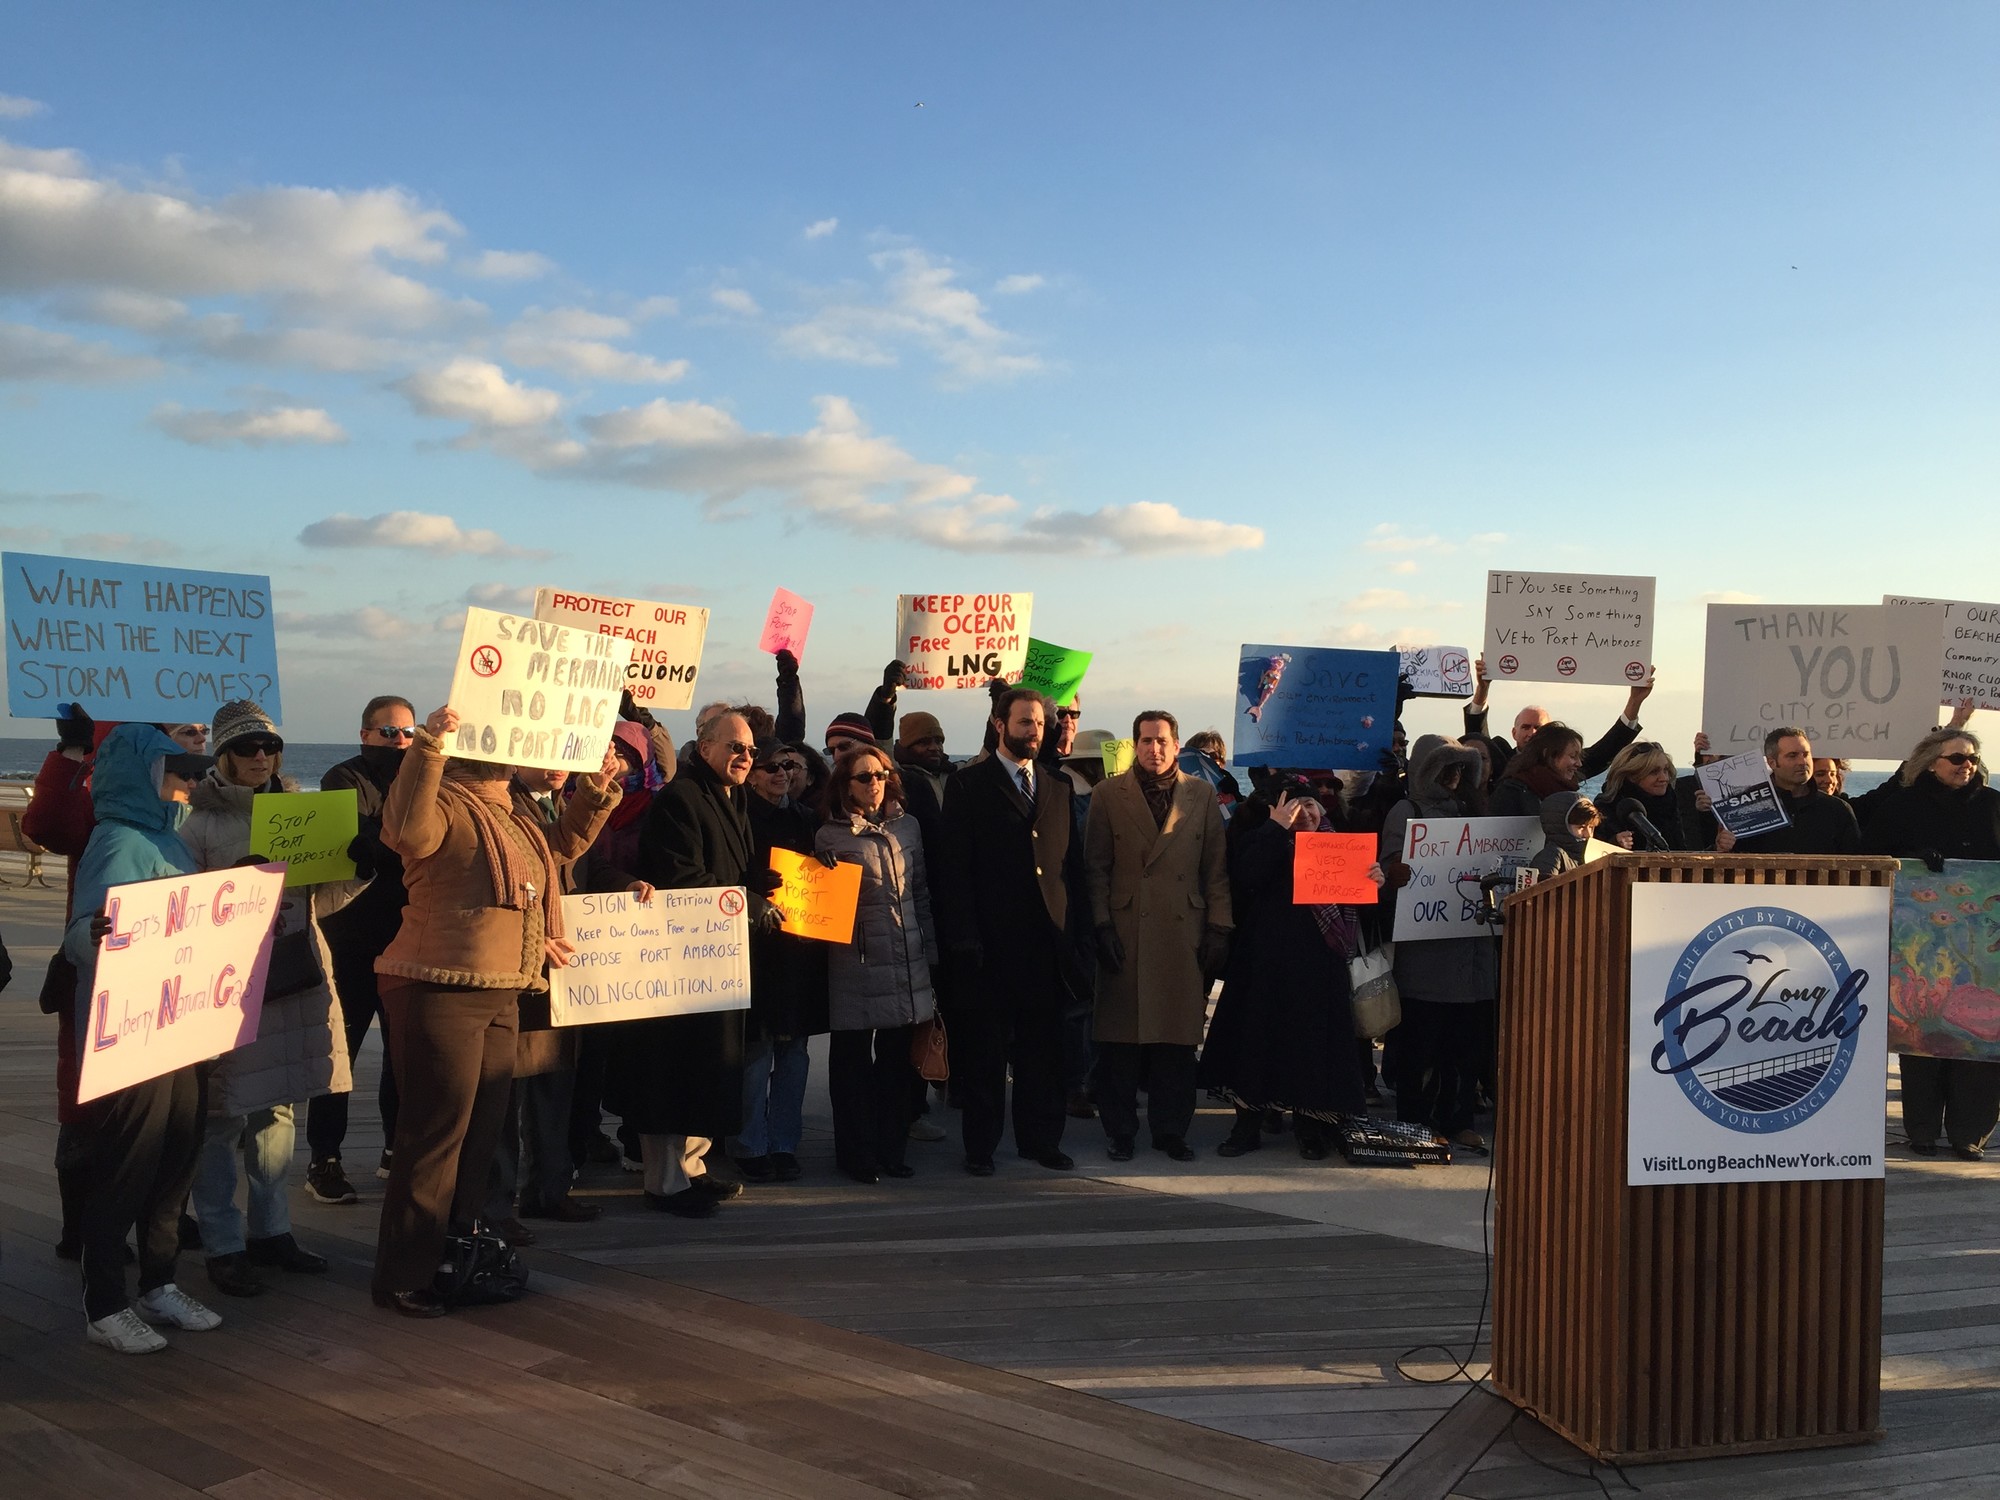 Protesters and city, state and federal officials gathered on the boardwalk to voice their opposition.